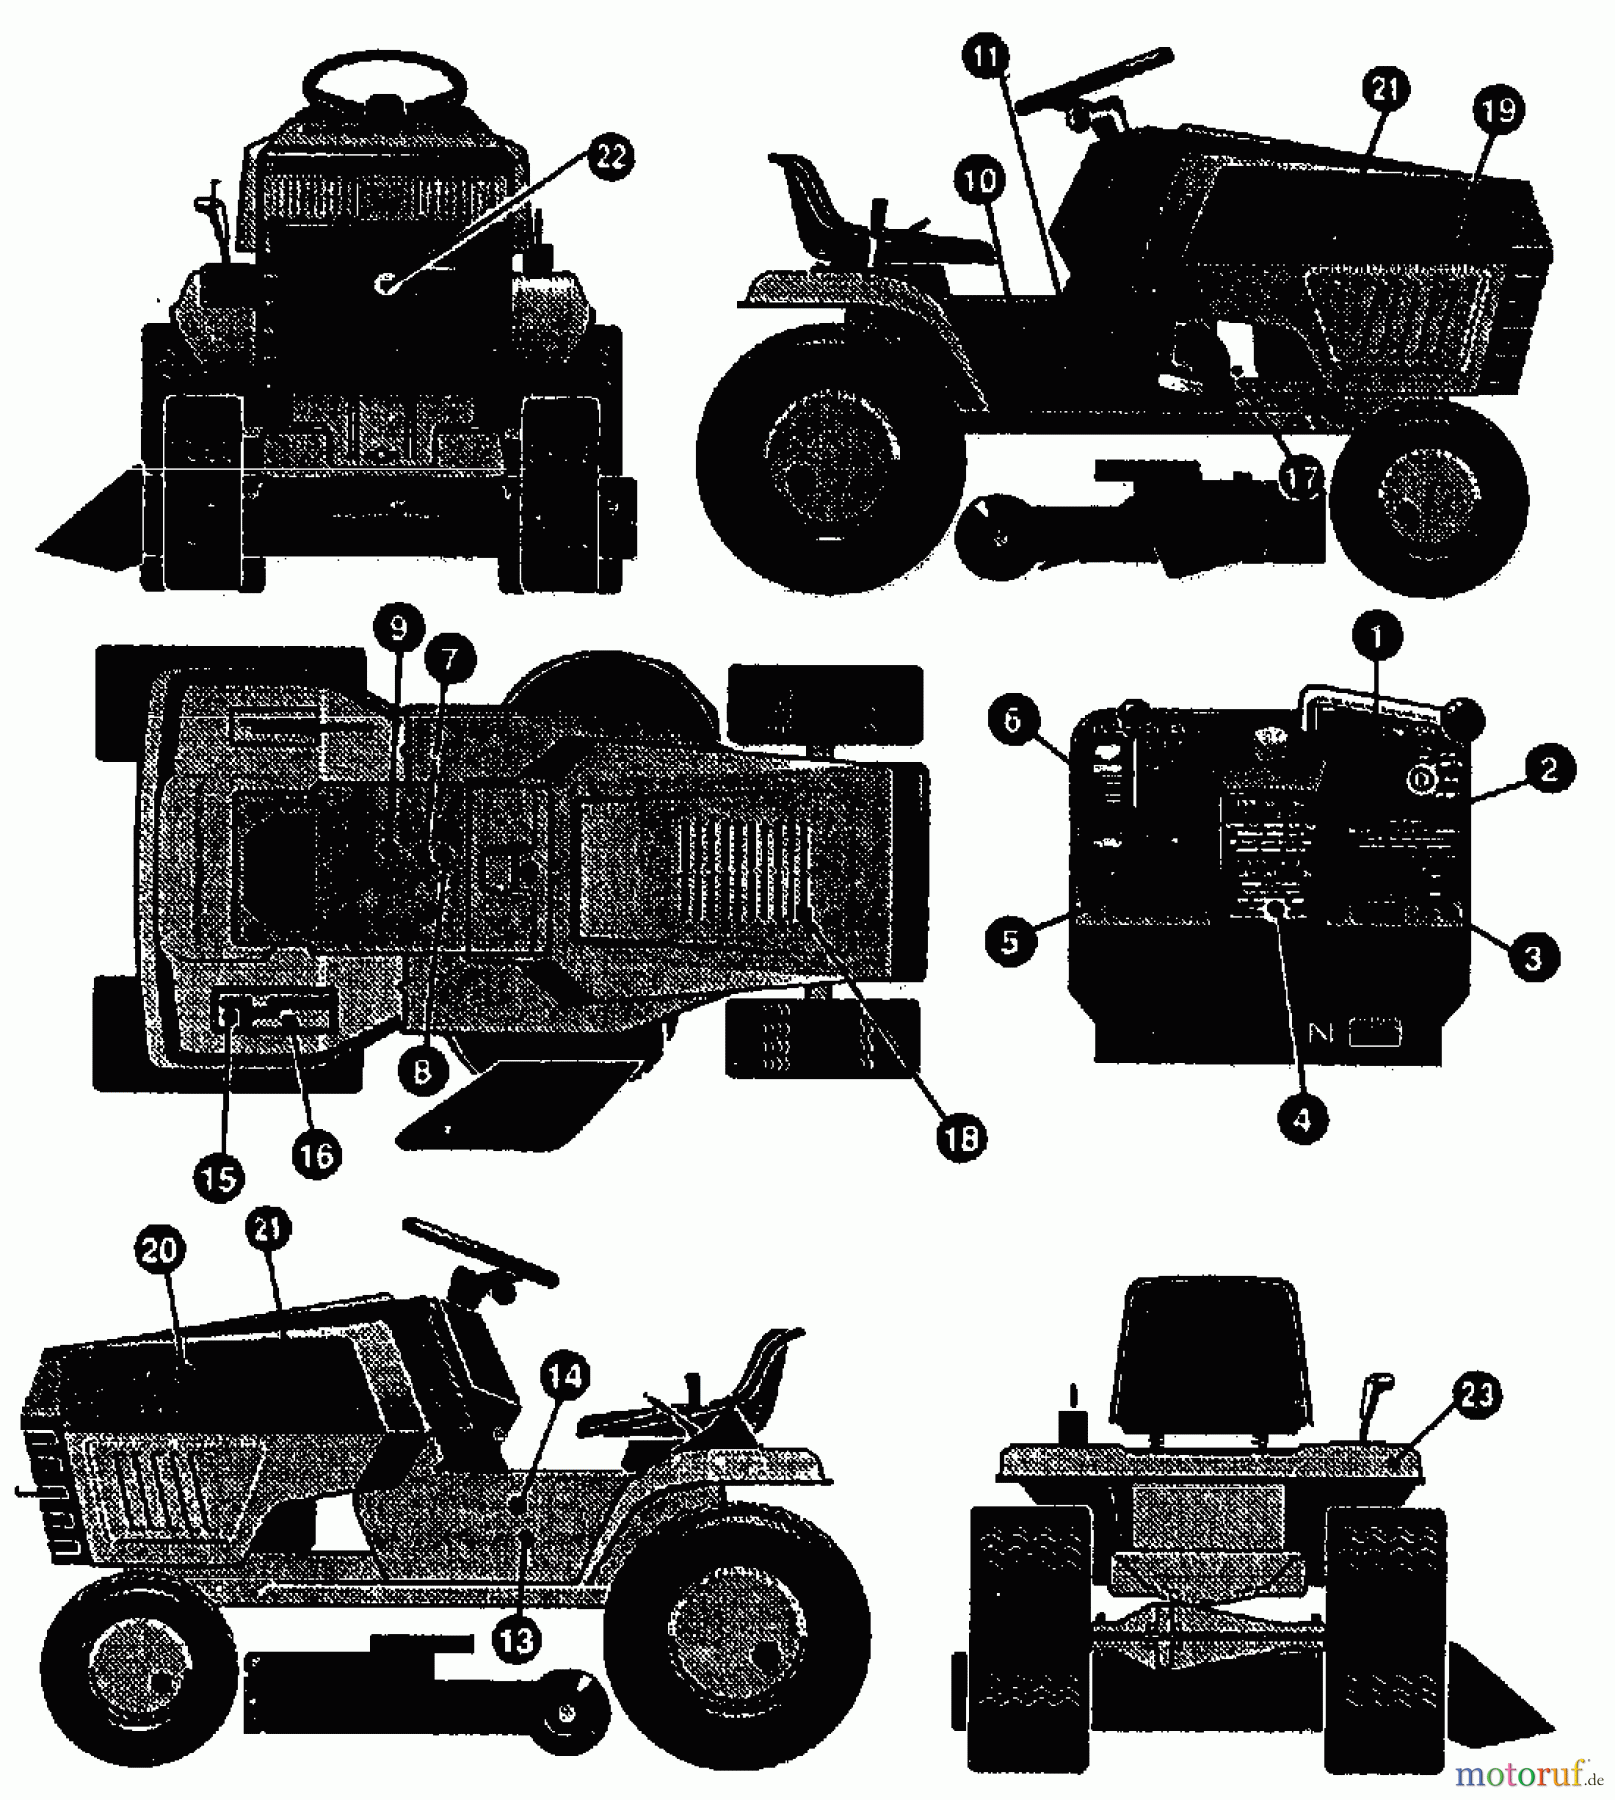  Gutbrod Lawn tractors RSB 110-16 H 00097.02  (1994) Decal